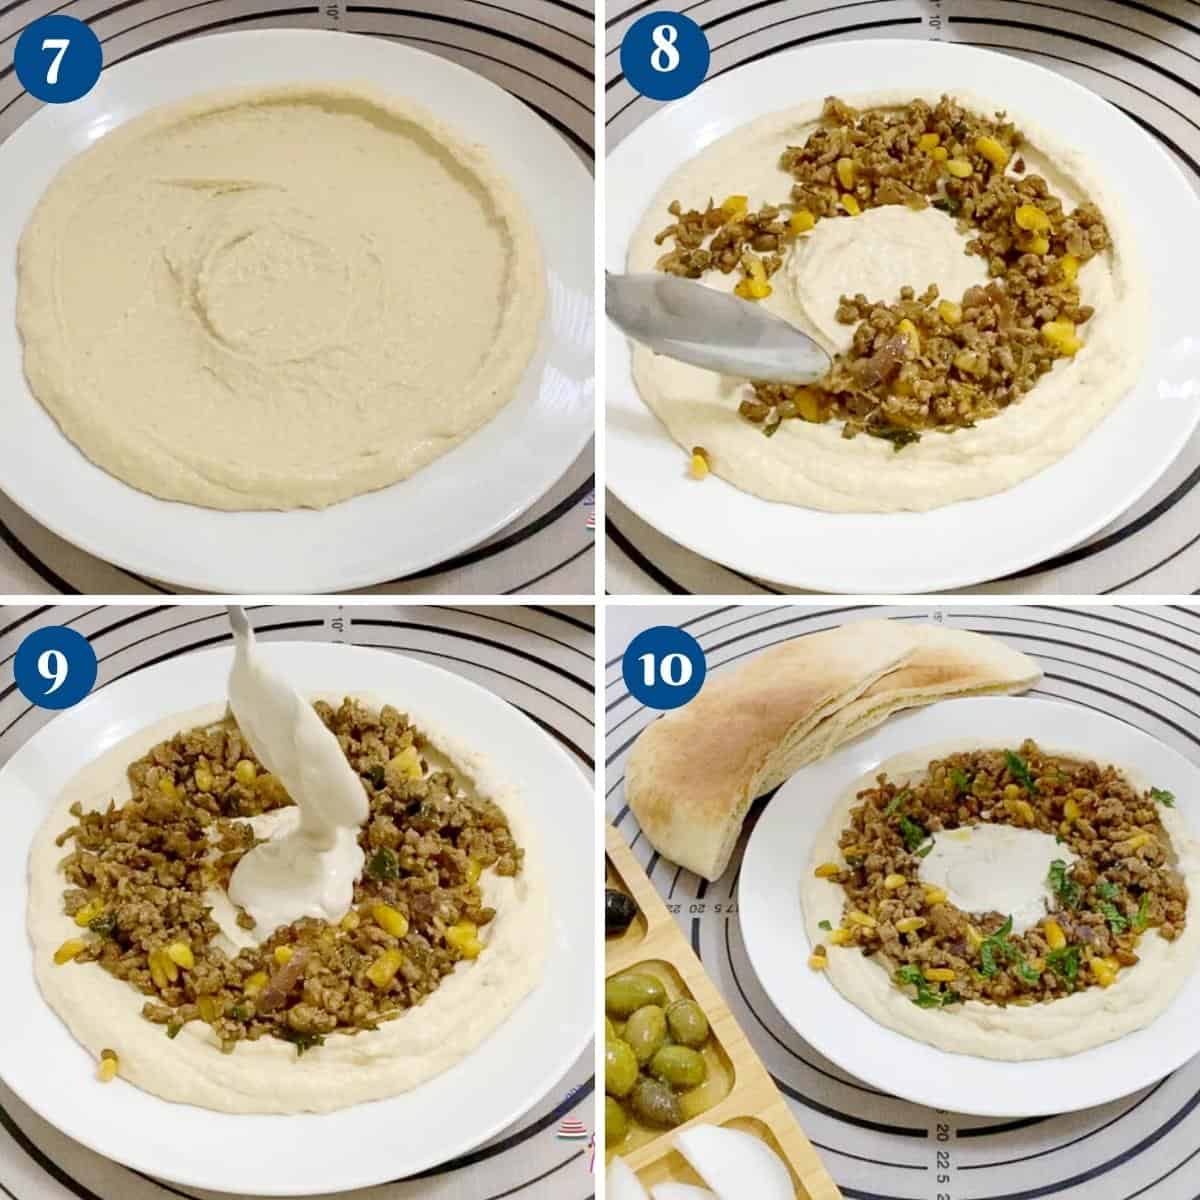 Progress pictures how to serve hummus with ground beef.